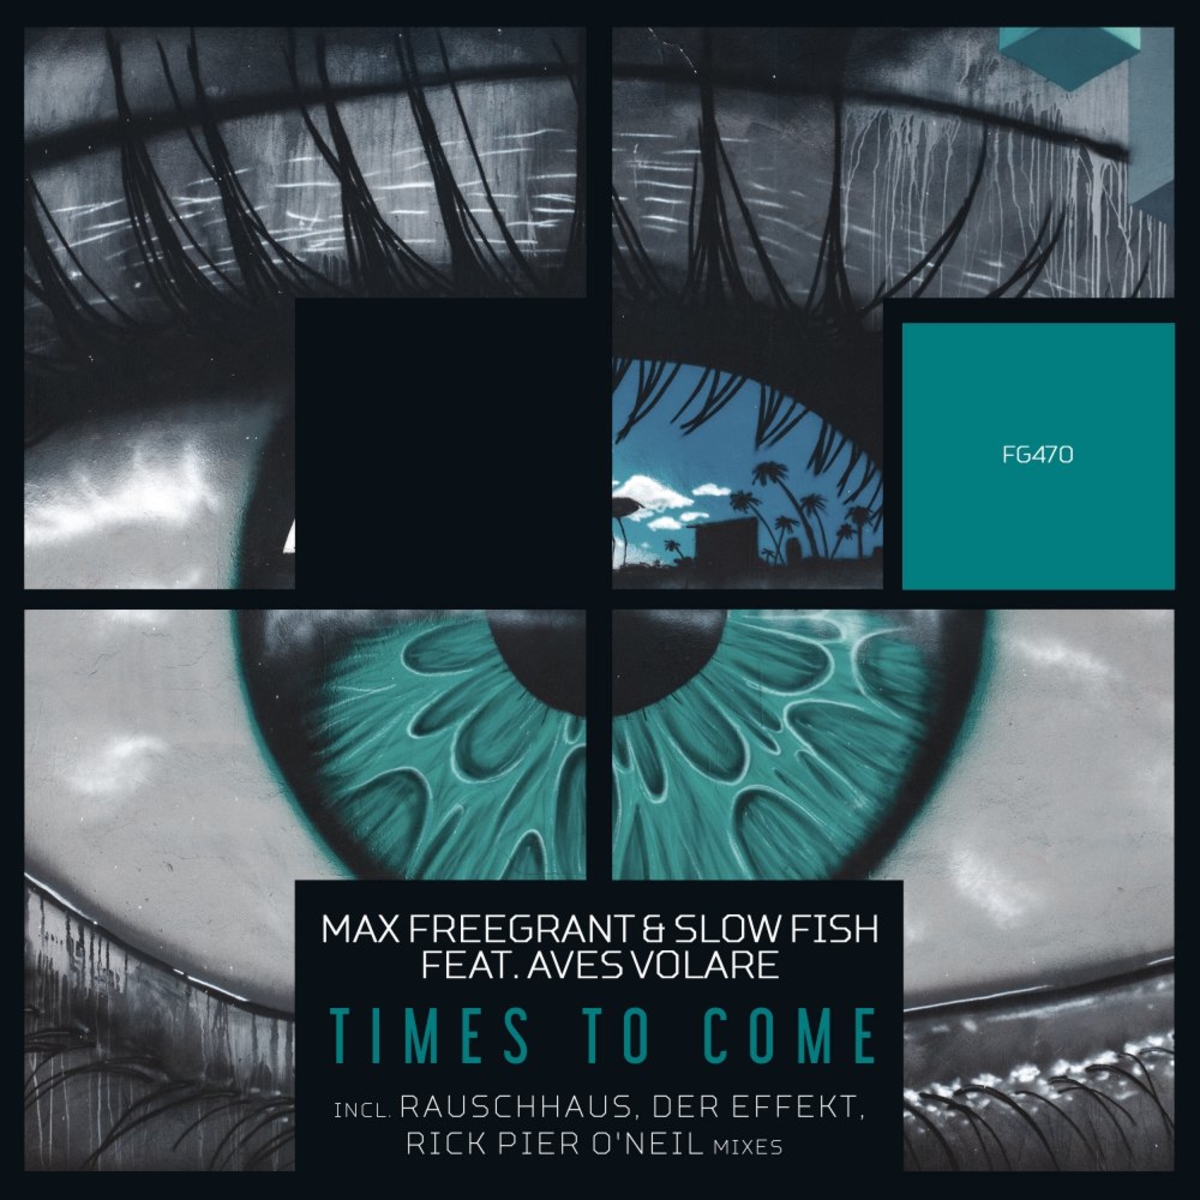 Max Freegrant & Slow Fish & Aves Volare - Times To Come (The Remixes) [FG470]